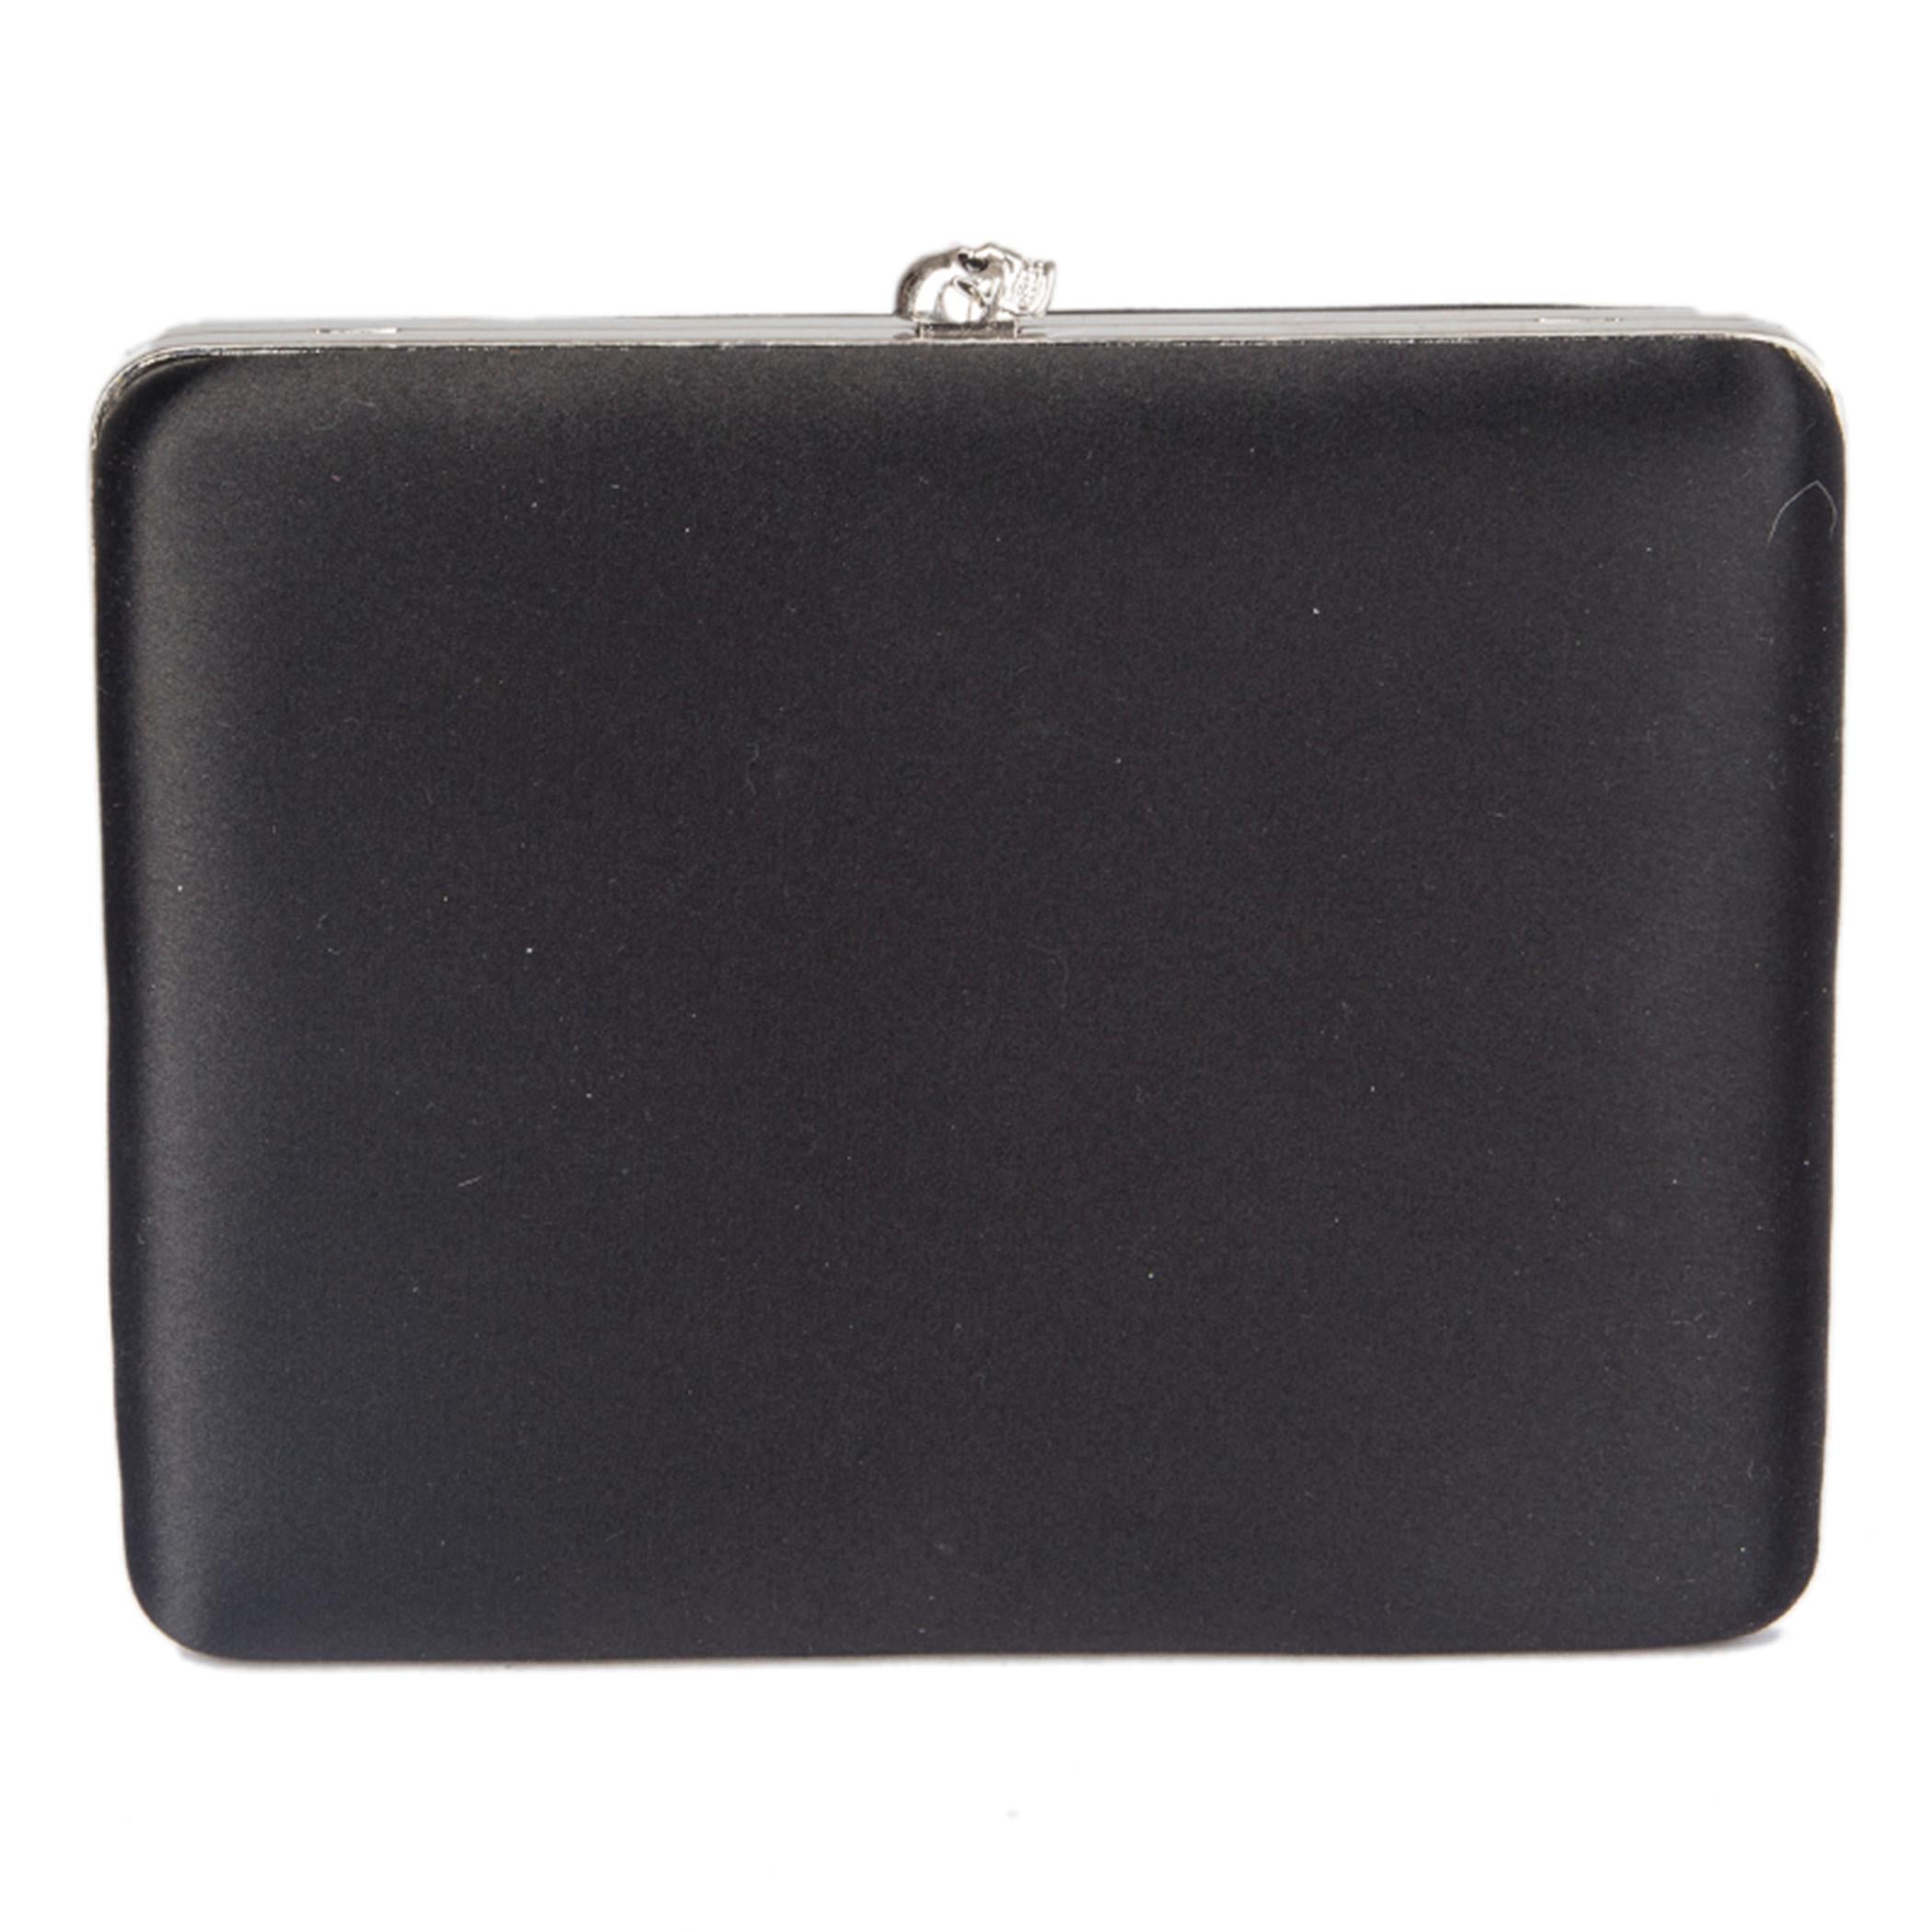 black satin clutch bag with bow